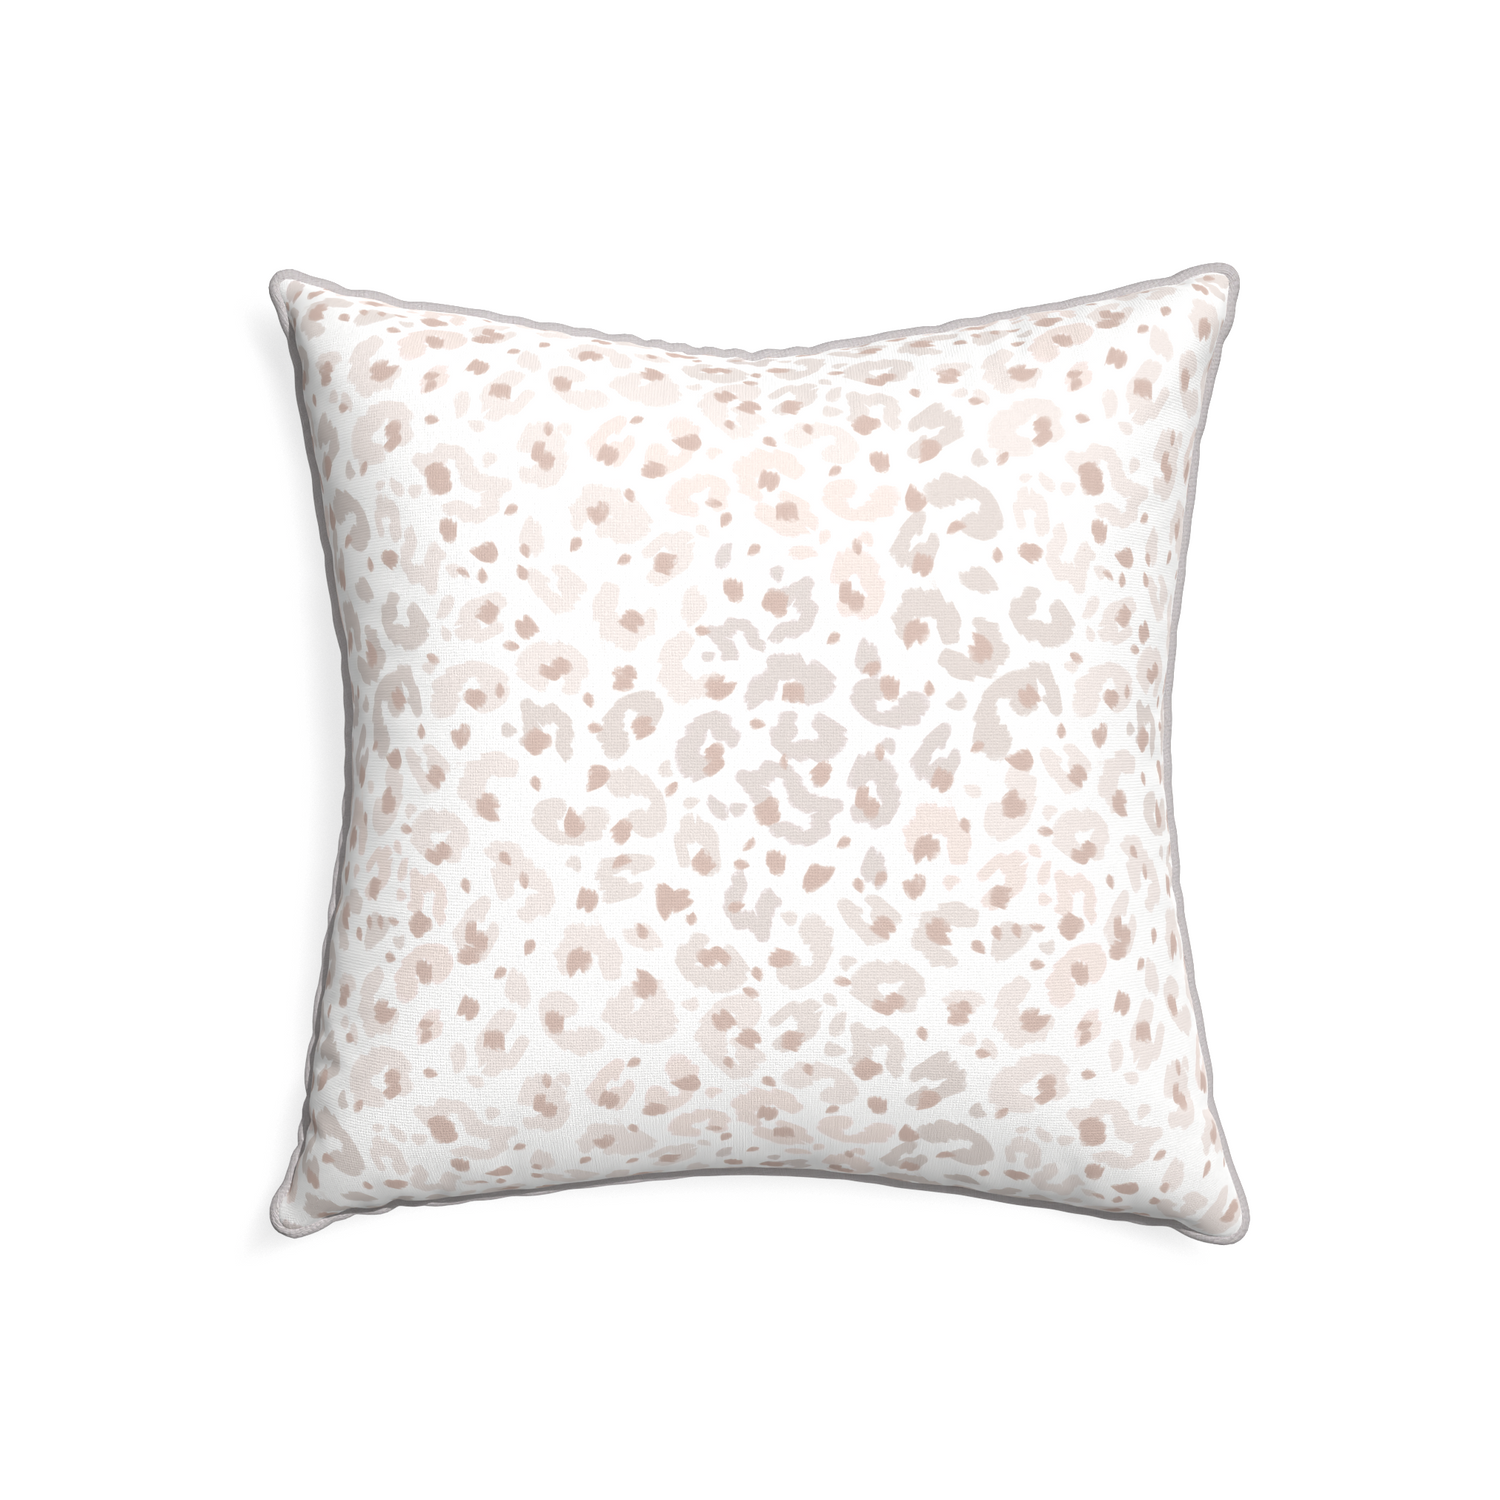 22-square rosie custom beige animal printpillow with pebble piping on white background